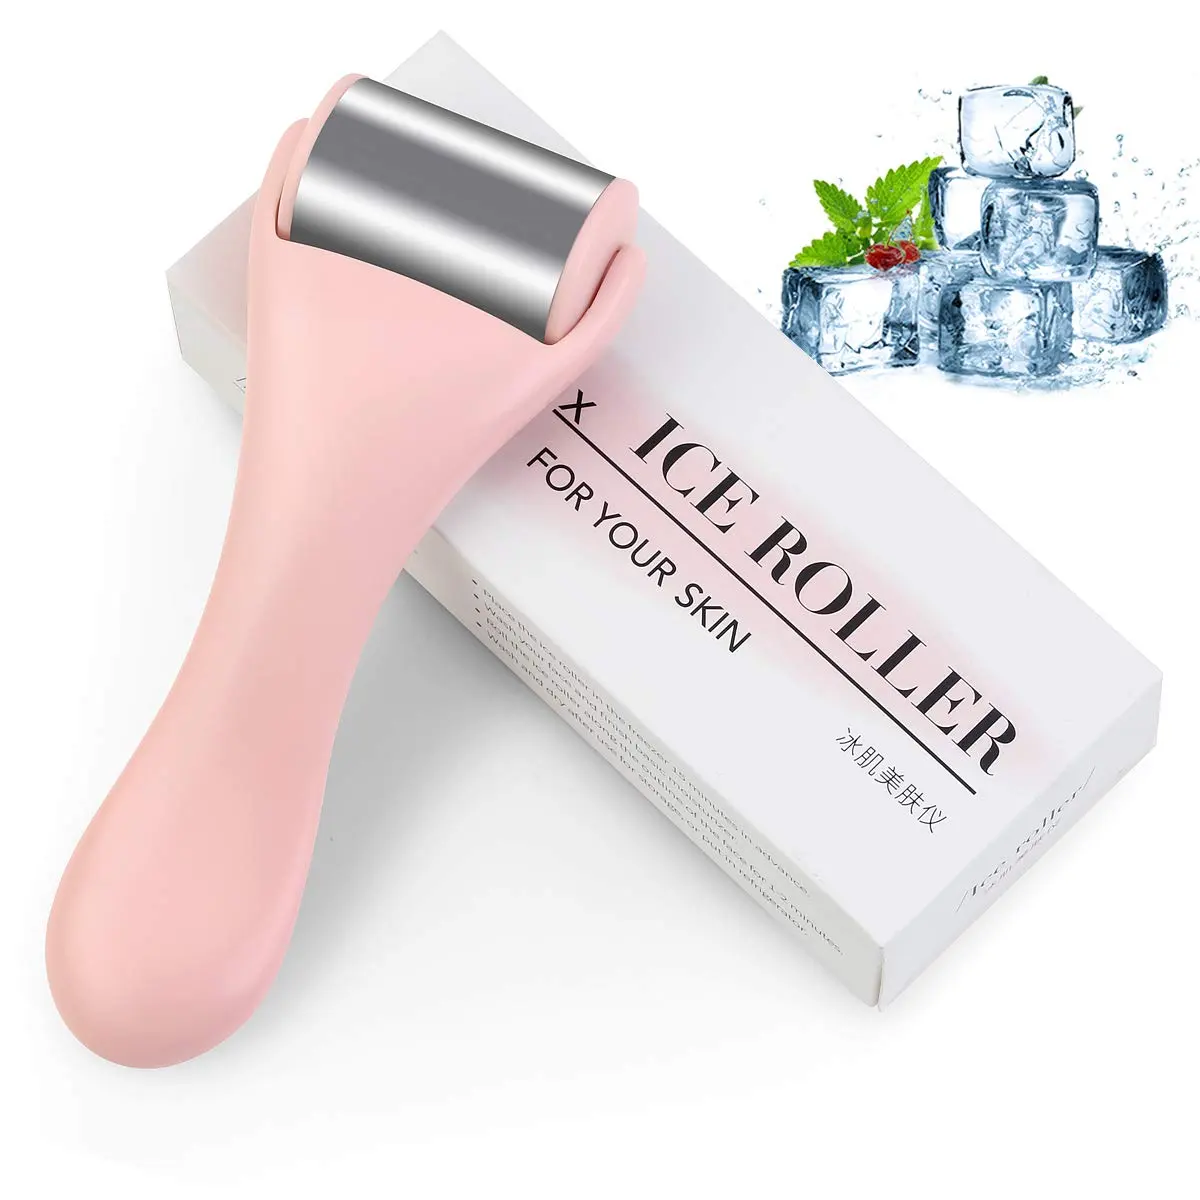 Skin Care Tools Pink Face Ice Roller for Puffiness Pain Relief Stainless Steel Eye Roller Facial Massager Roller